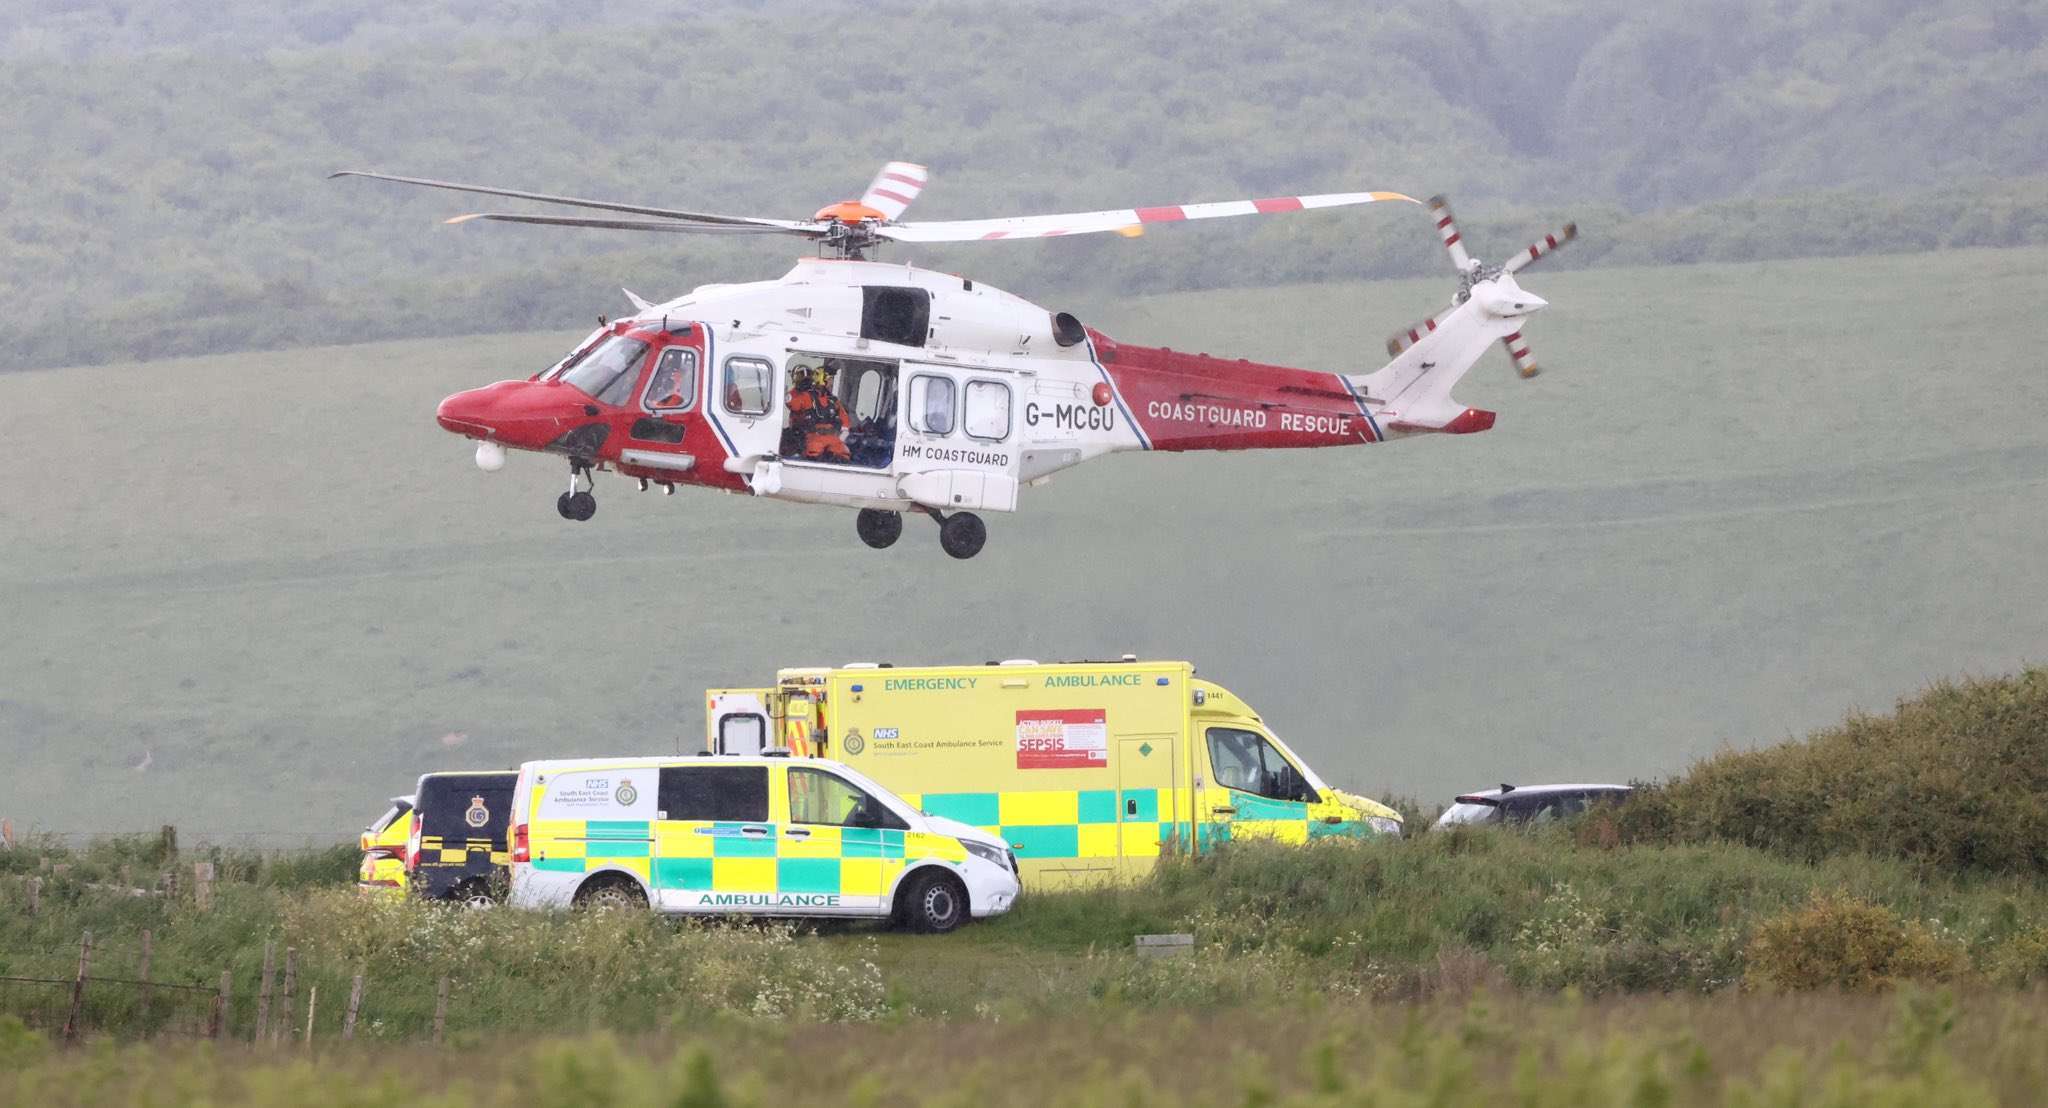 Woman in Her 60s Dies After Falling from Seaford Head Cliffs